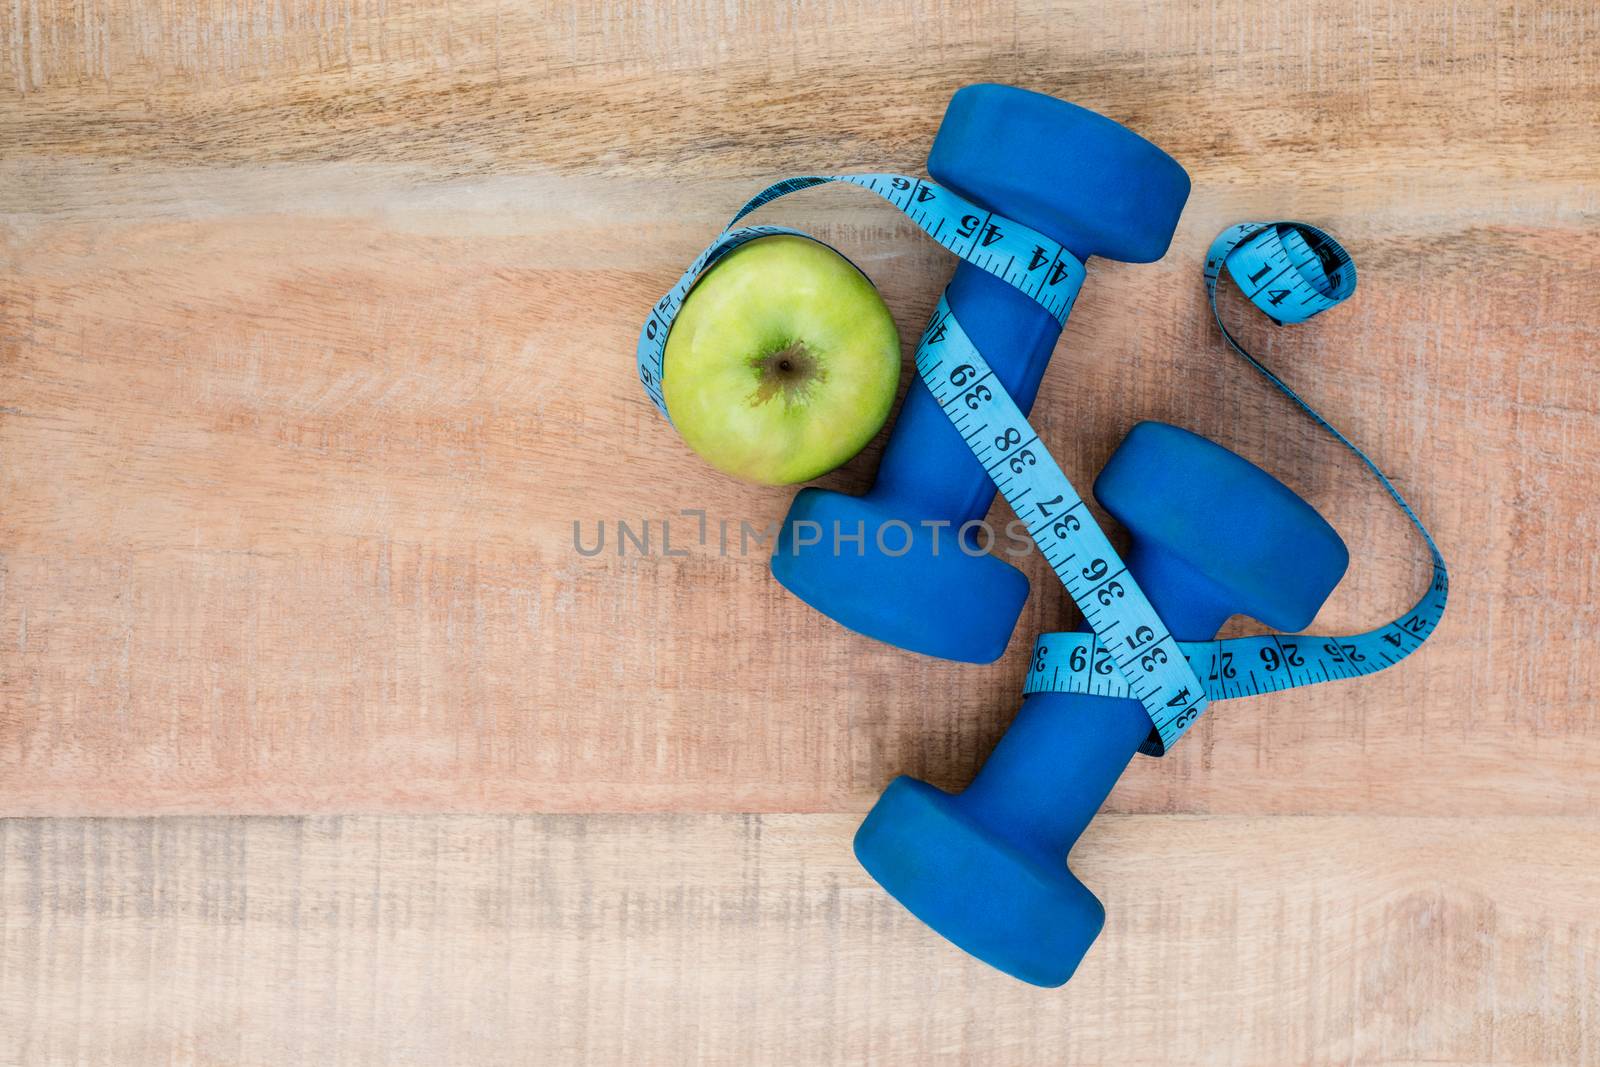 Ingredients for a healthy lifestyle on wooden table